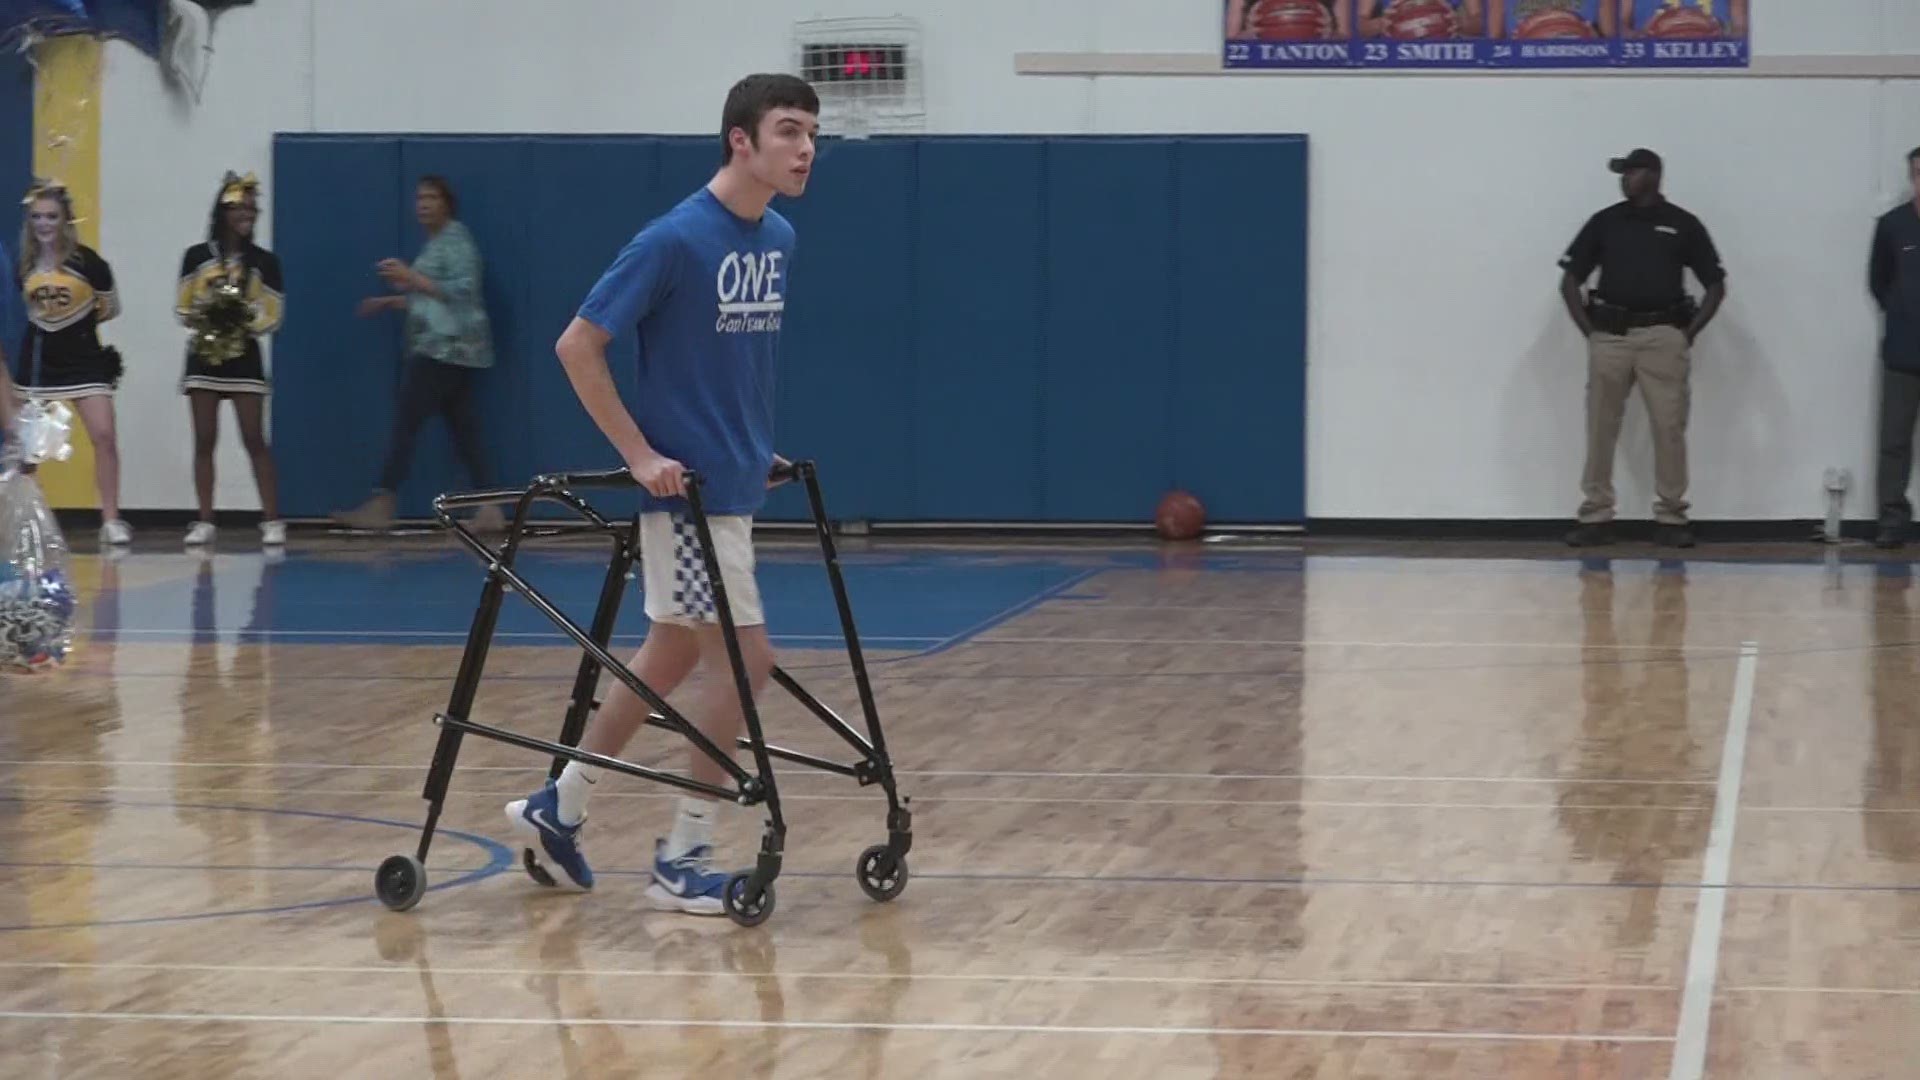 Dylan Jester is a senior at Sulphur Springs High School with cerebral palsy, and Friday evening, he took his dreams to the court.